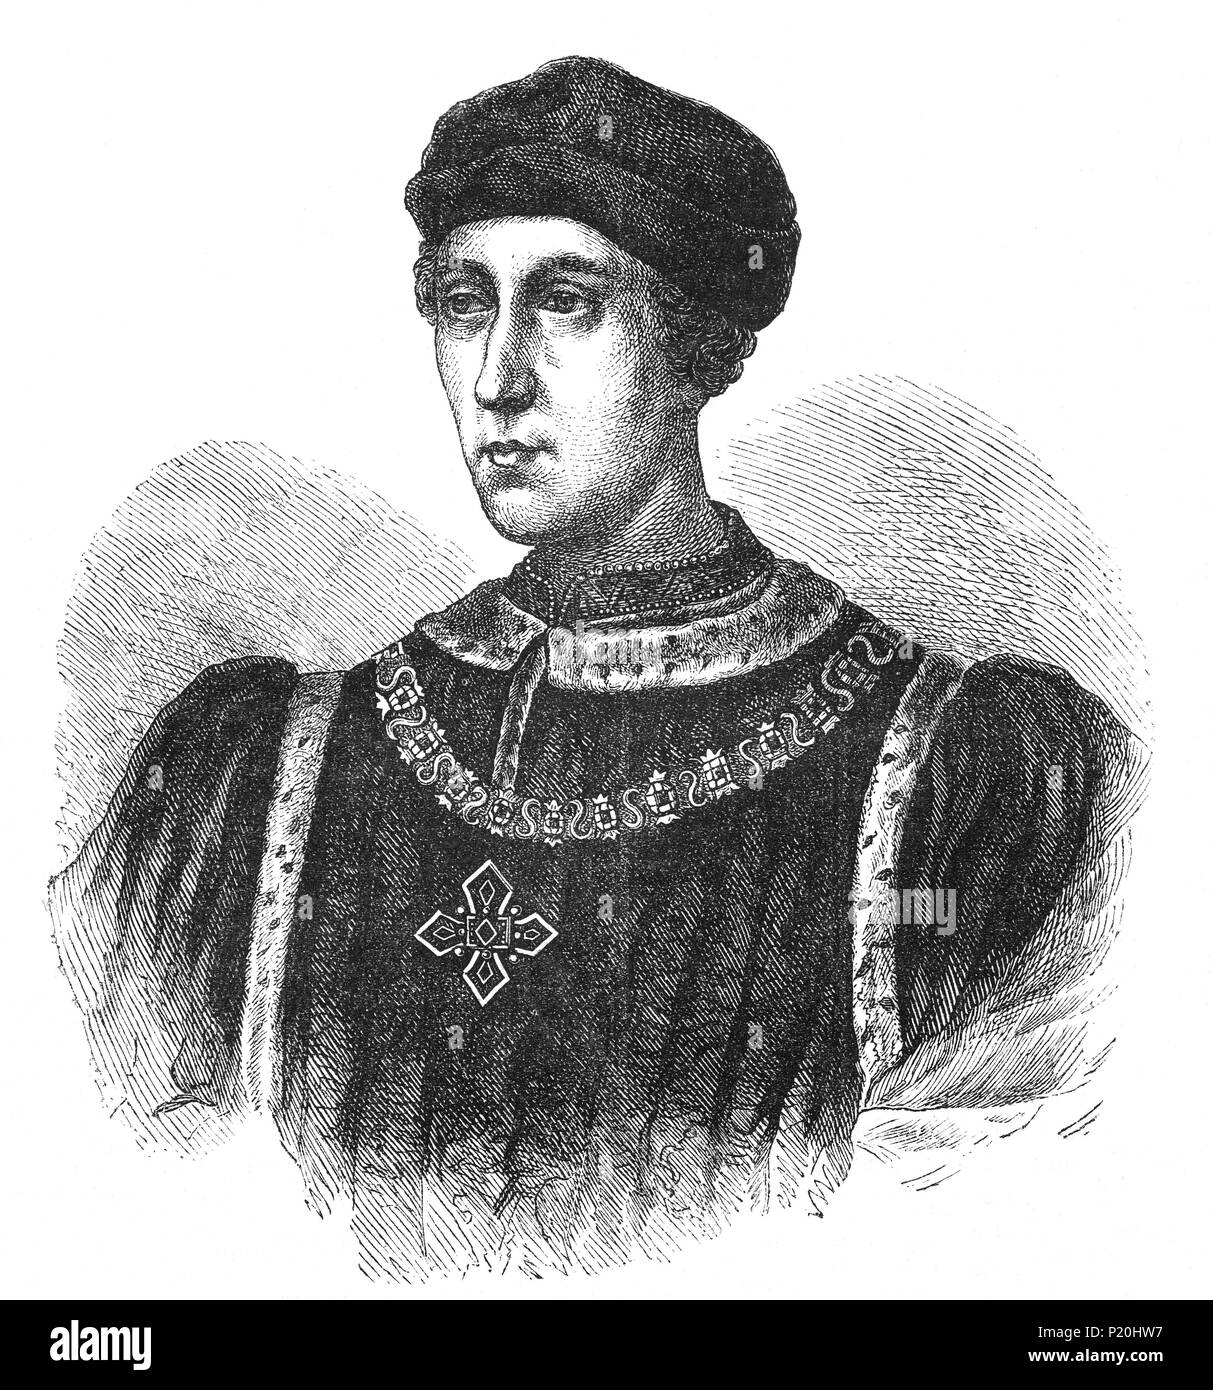 A portrait of Henry VI (1421-1471), King of England from 1422 to 1461 and again from 1470 to 1471, and disputed King of France from 1422 to 1453. The only child of Henry V, he succeeded to the English throne at the age of nine months upon his father's death, and succeeded to the French throne on the death of his maternal grandfather Charles VI shortly afterwards. Although his reign was scarred by the 100 Years War, his real lasting achievement was his fostering of education: he founded Eton College, King's College, Cambridge and All Souls College, Oxford. Stock Photo